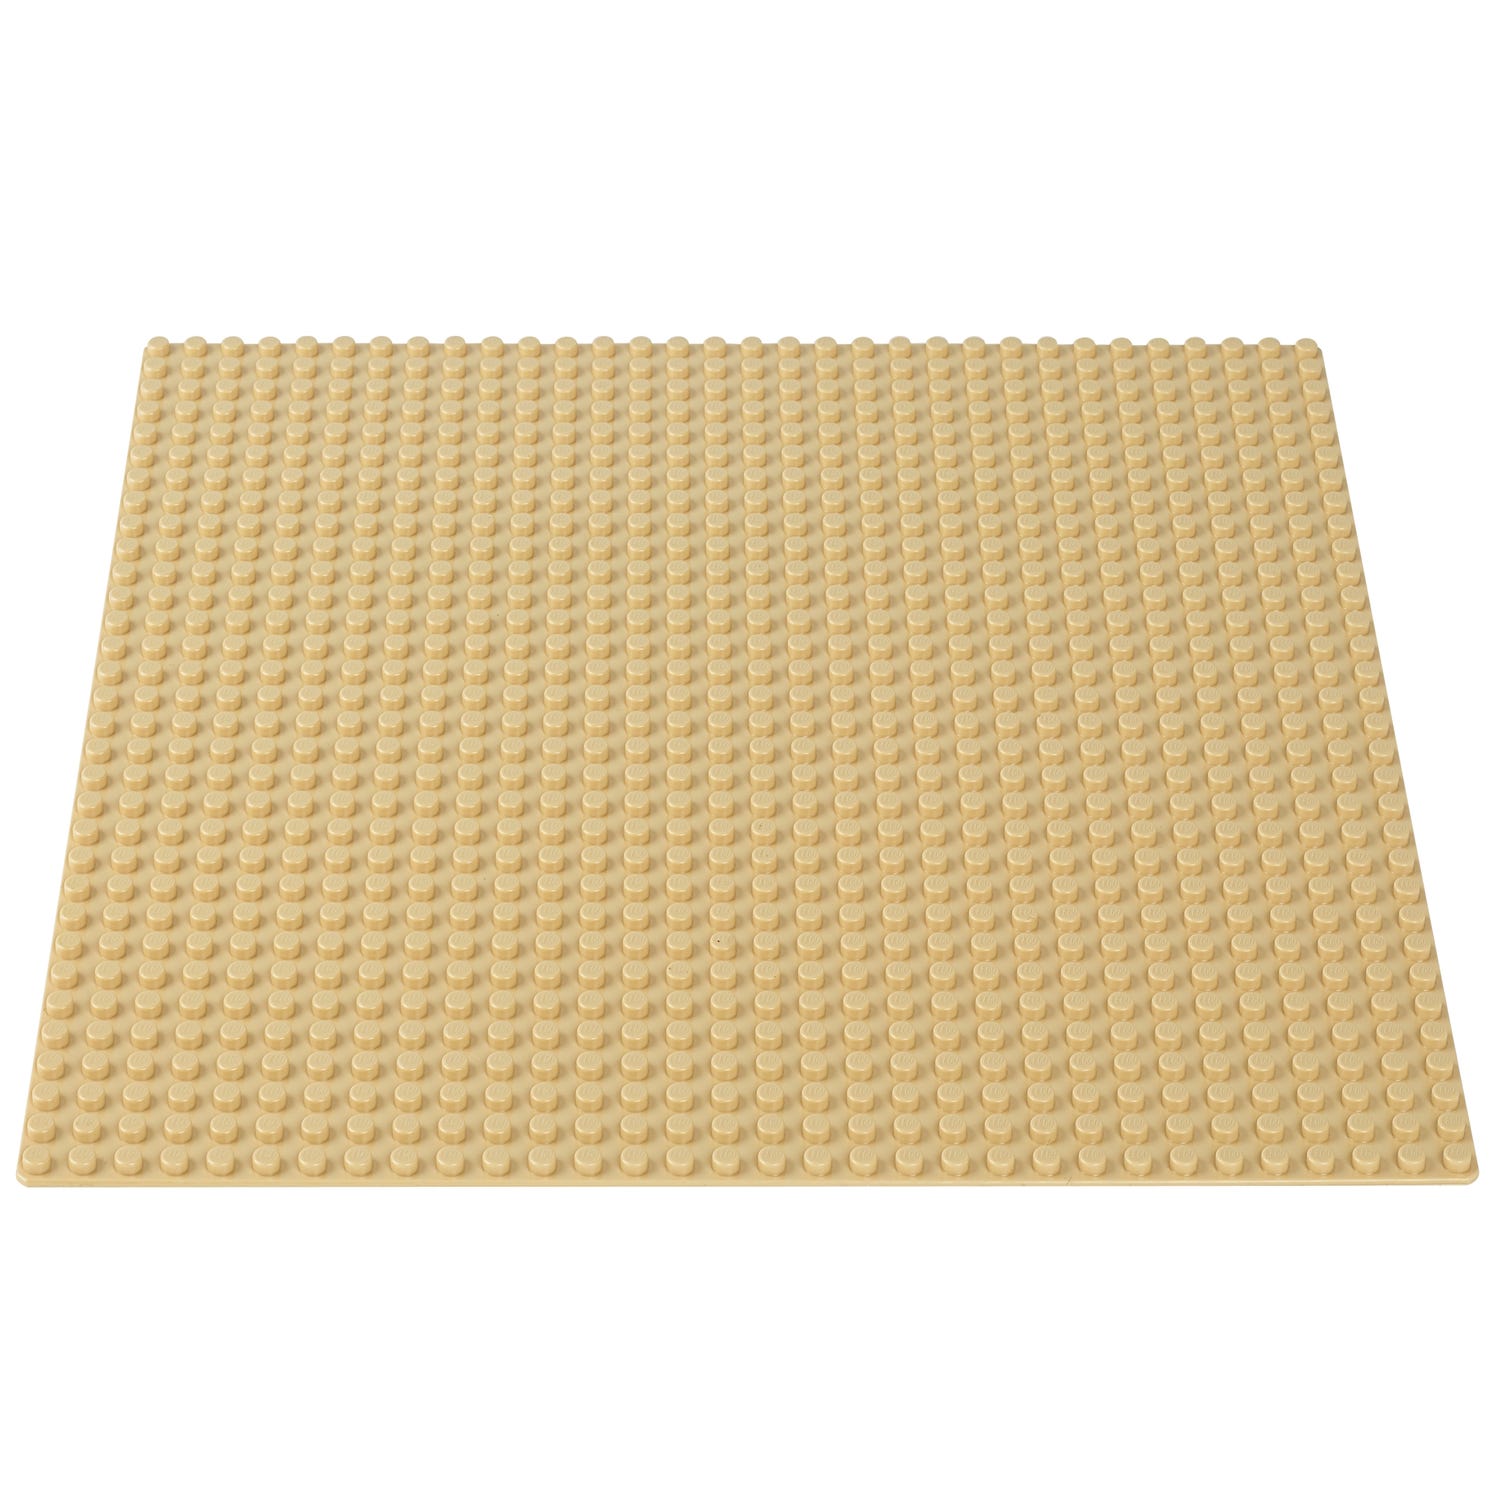 Sand Baseplate 10699 | Classic | Buy online at the Official LEGO® Shop US